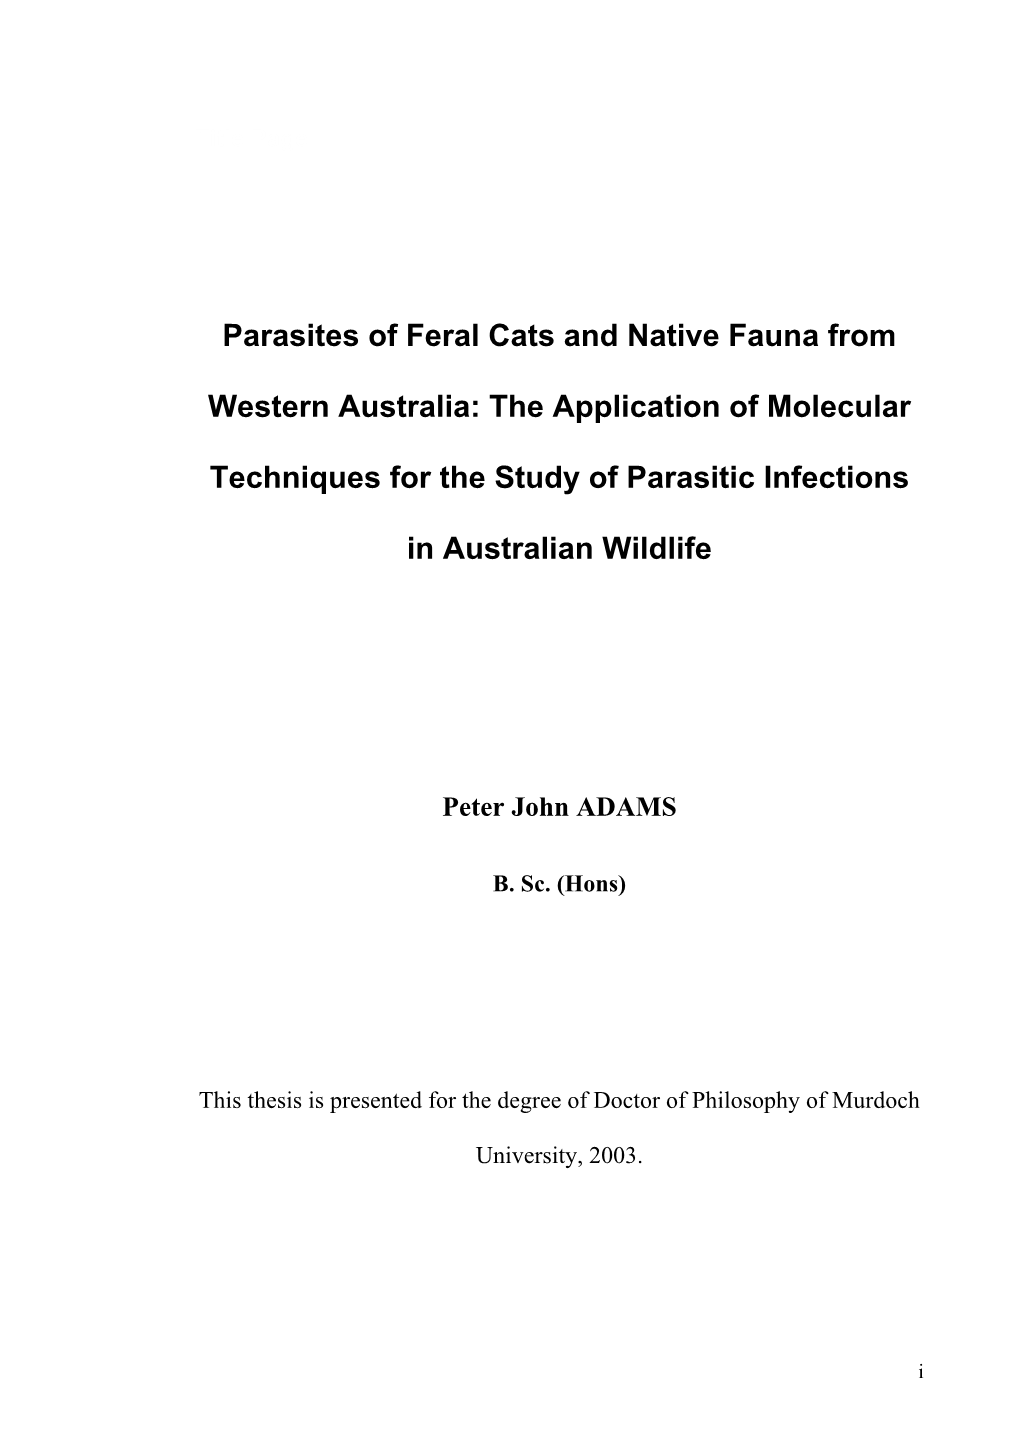 Parasites of Feral Cats and Native Fauna from Western Australia: the Application of Molecular Techniques for the Study of Parasi